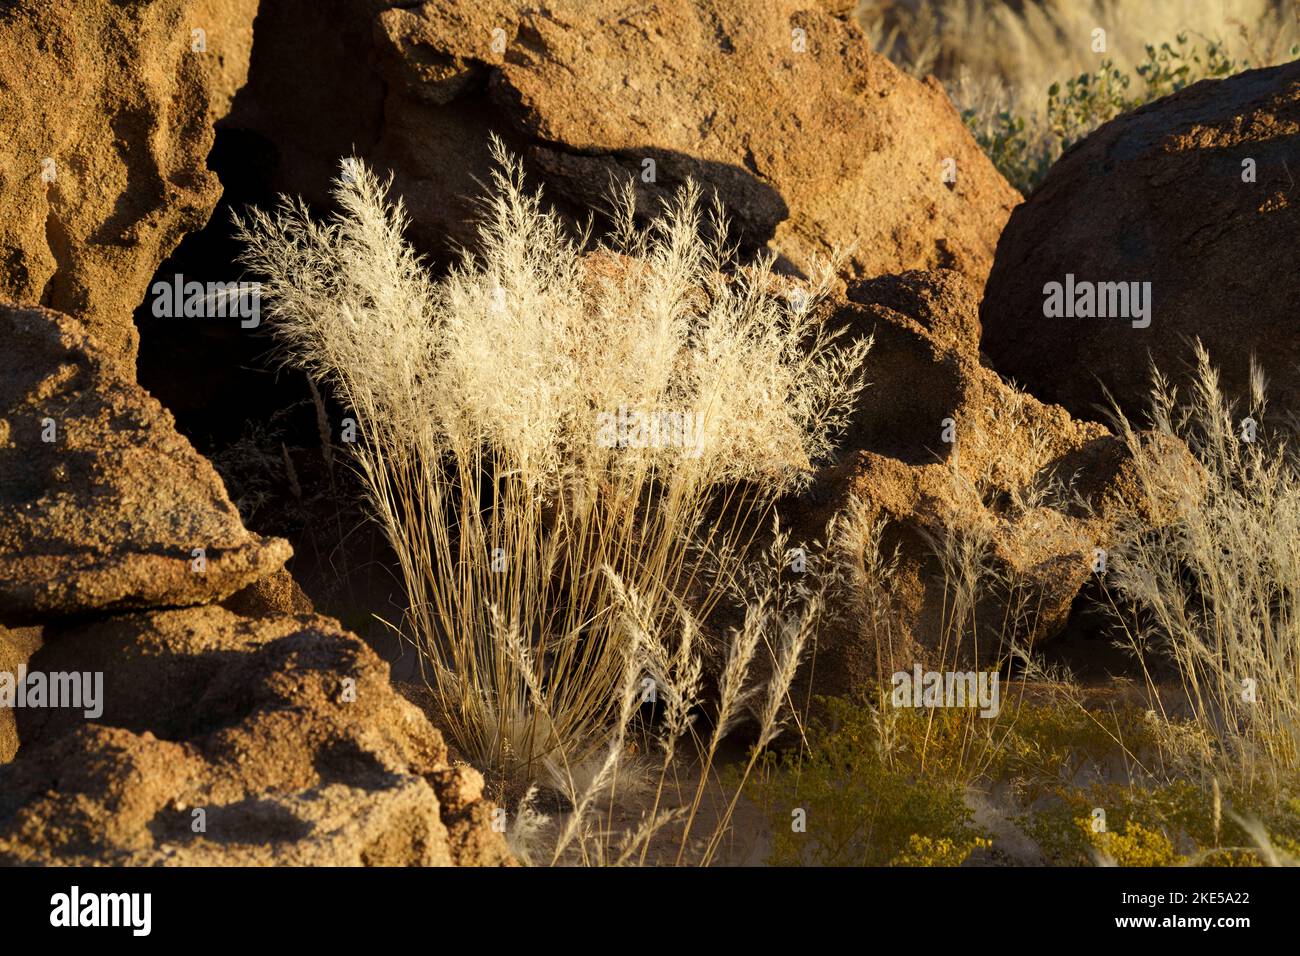 Golden light shines on a beautiful grass bush, tuft, which is surrounded by orange rocks. Damaraland, Namibia, Africa Stock Photo